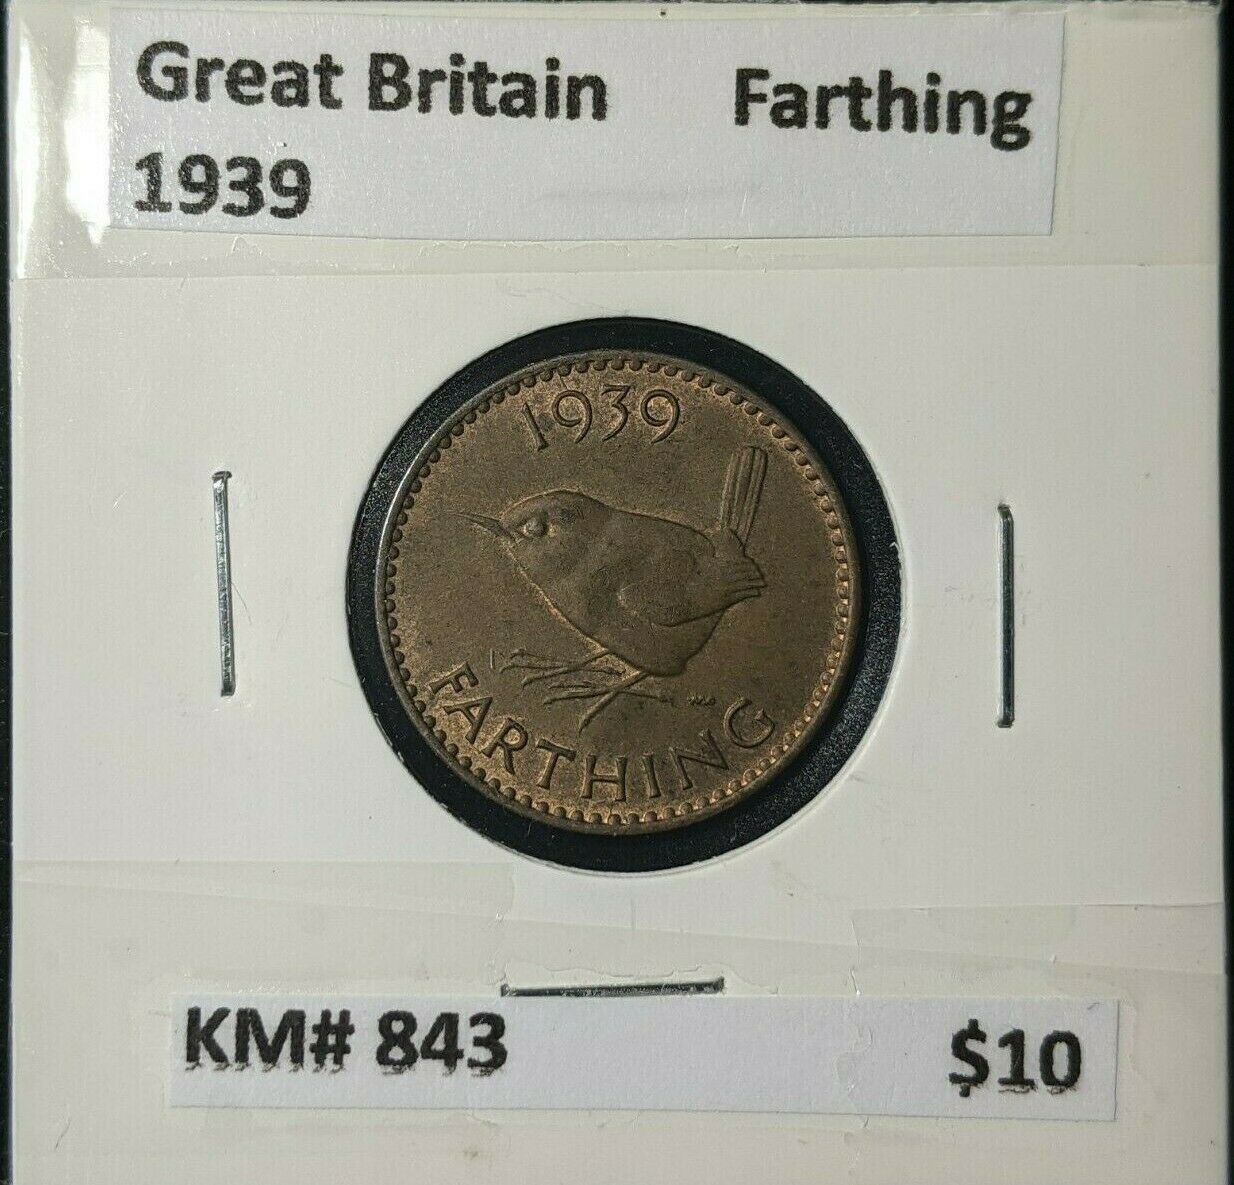 Great Britain 1939 1/4d Farthing KM# 843 #158